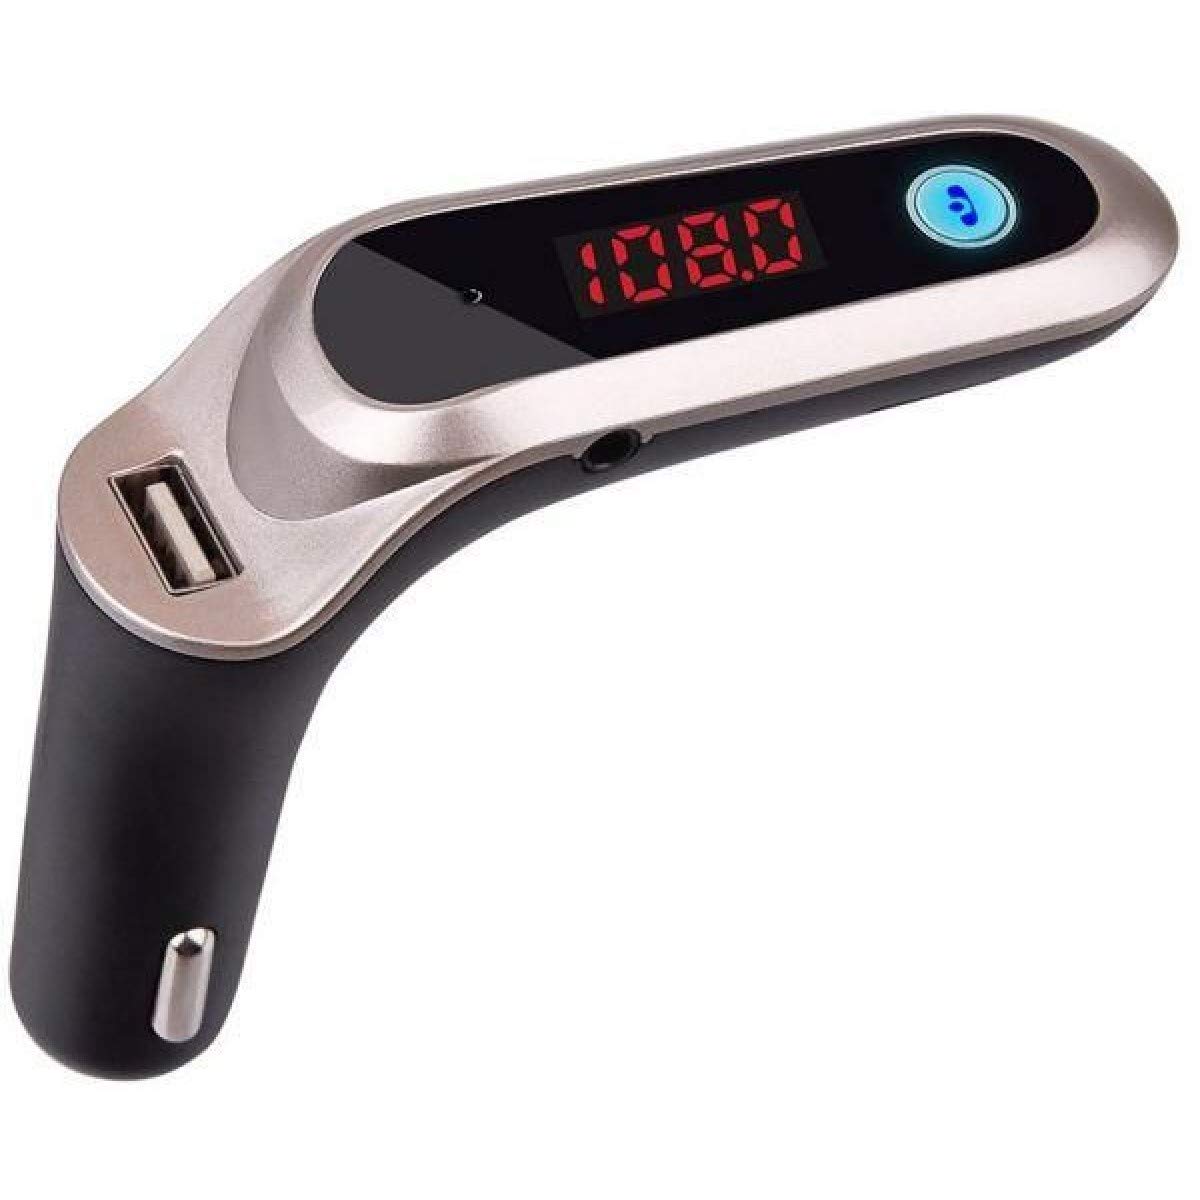 CAR FM TRANSMITTER G6+BLUETOOTH + USB + AUX + SD + REMOTE + LCD SCREEN ,Media Players Accessories